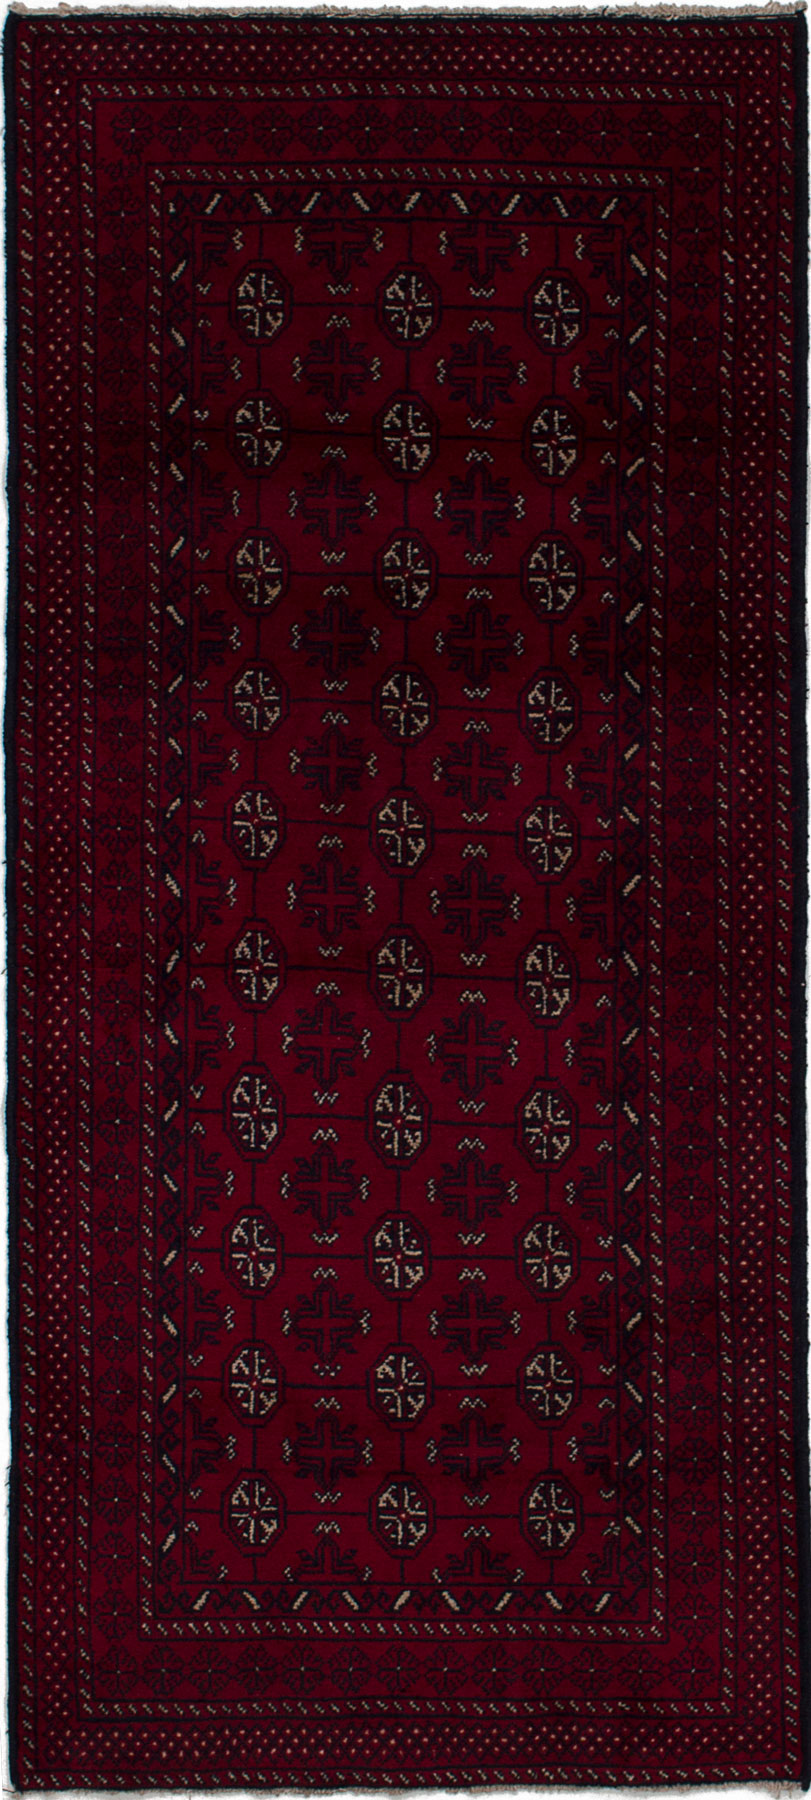 Hand-knotted Royal Baluch Dark Red Wool Rug 2'9" x 6'3" Size: 2'9" x 6'3"  